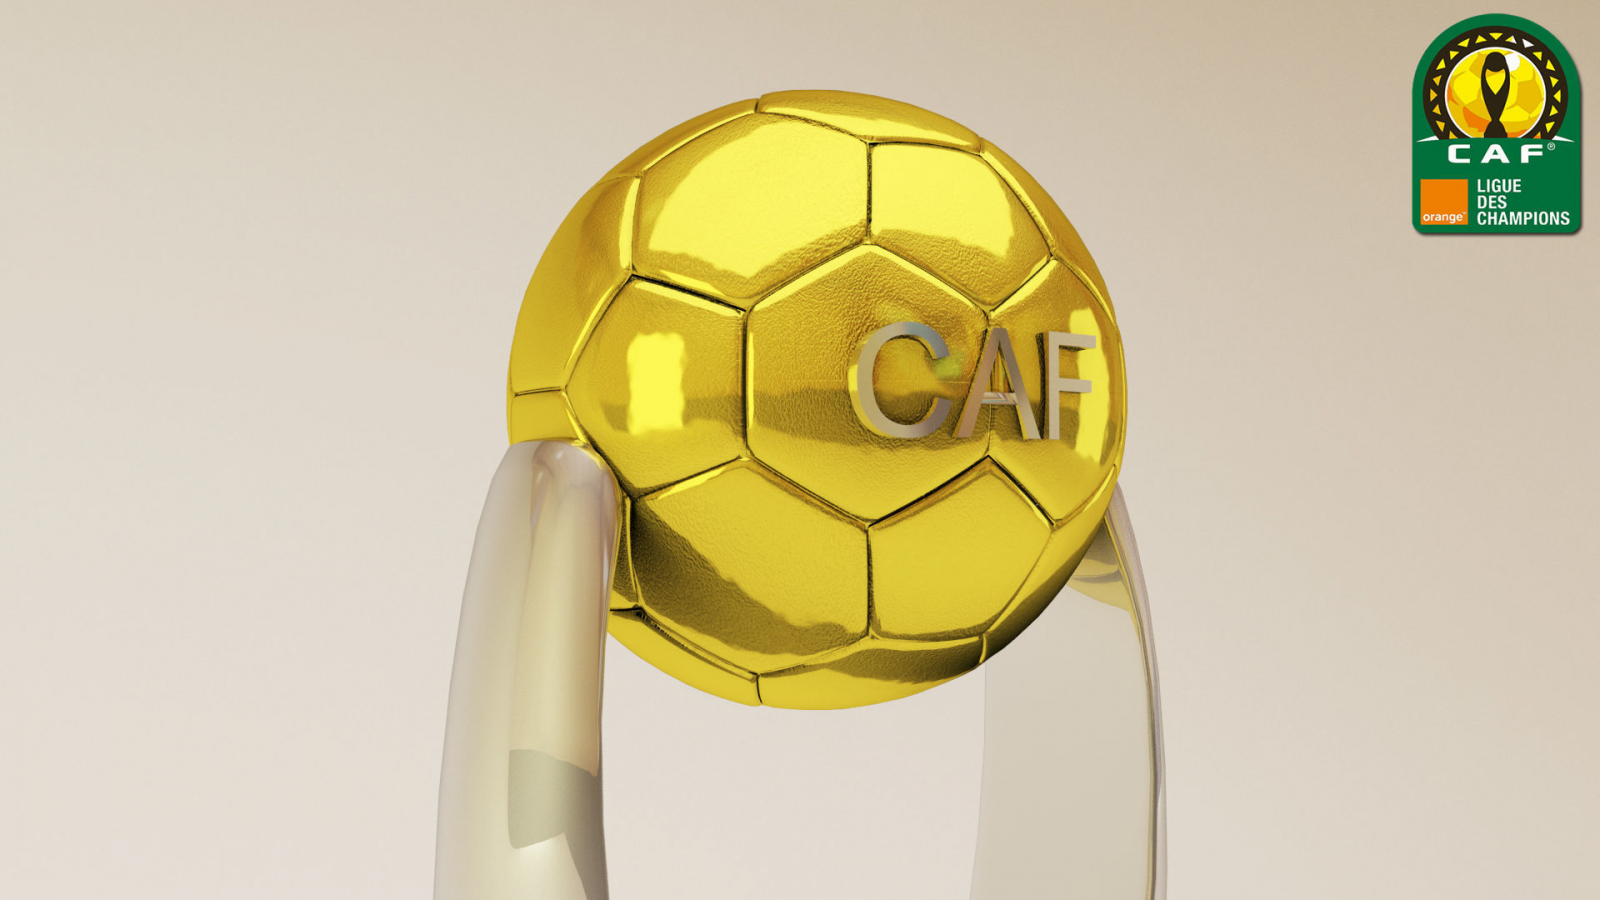 Caf Champions League Wallpapers